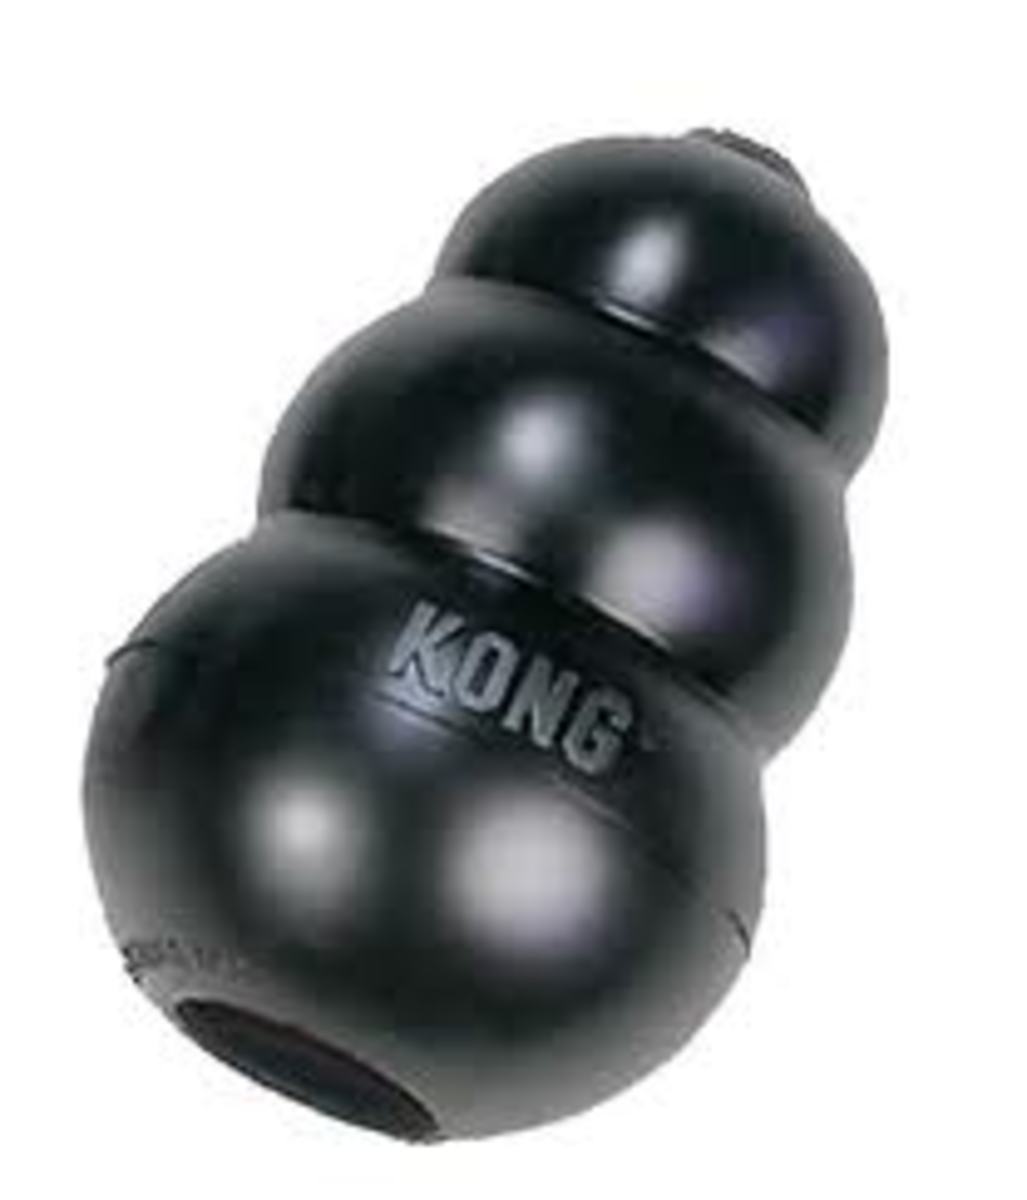 The Kong is a classic dog toy that really does stand up to the test!